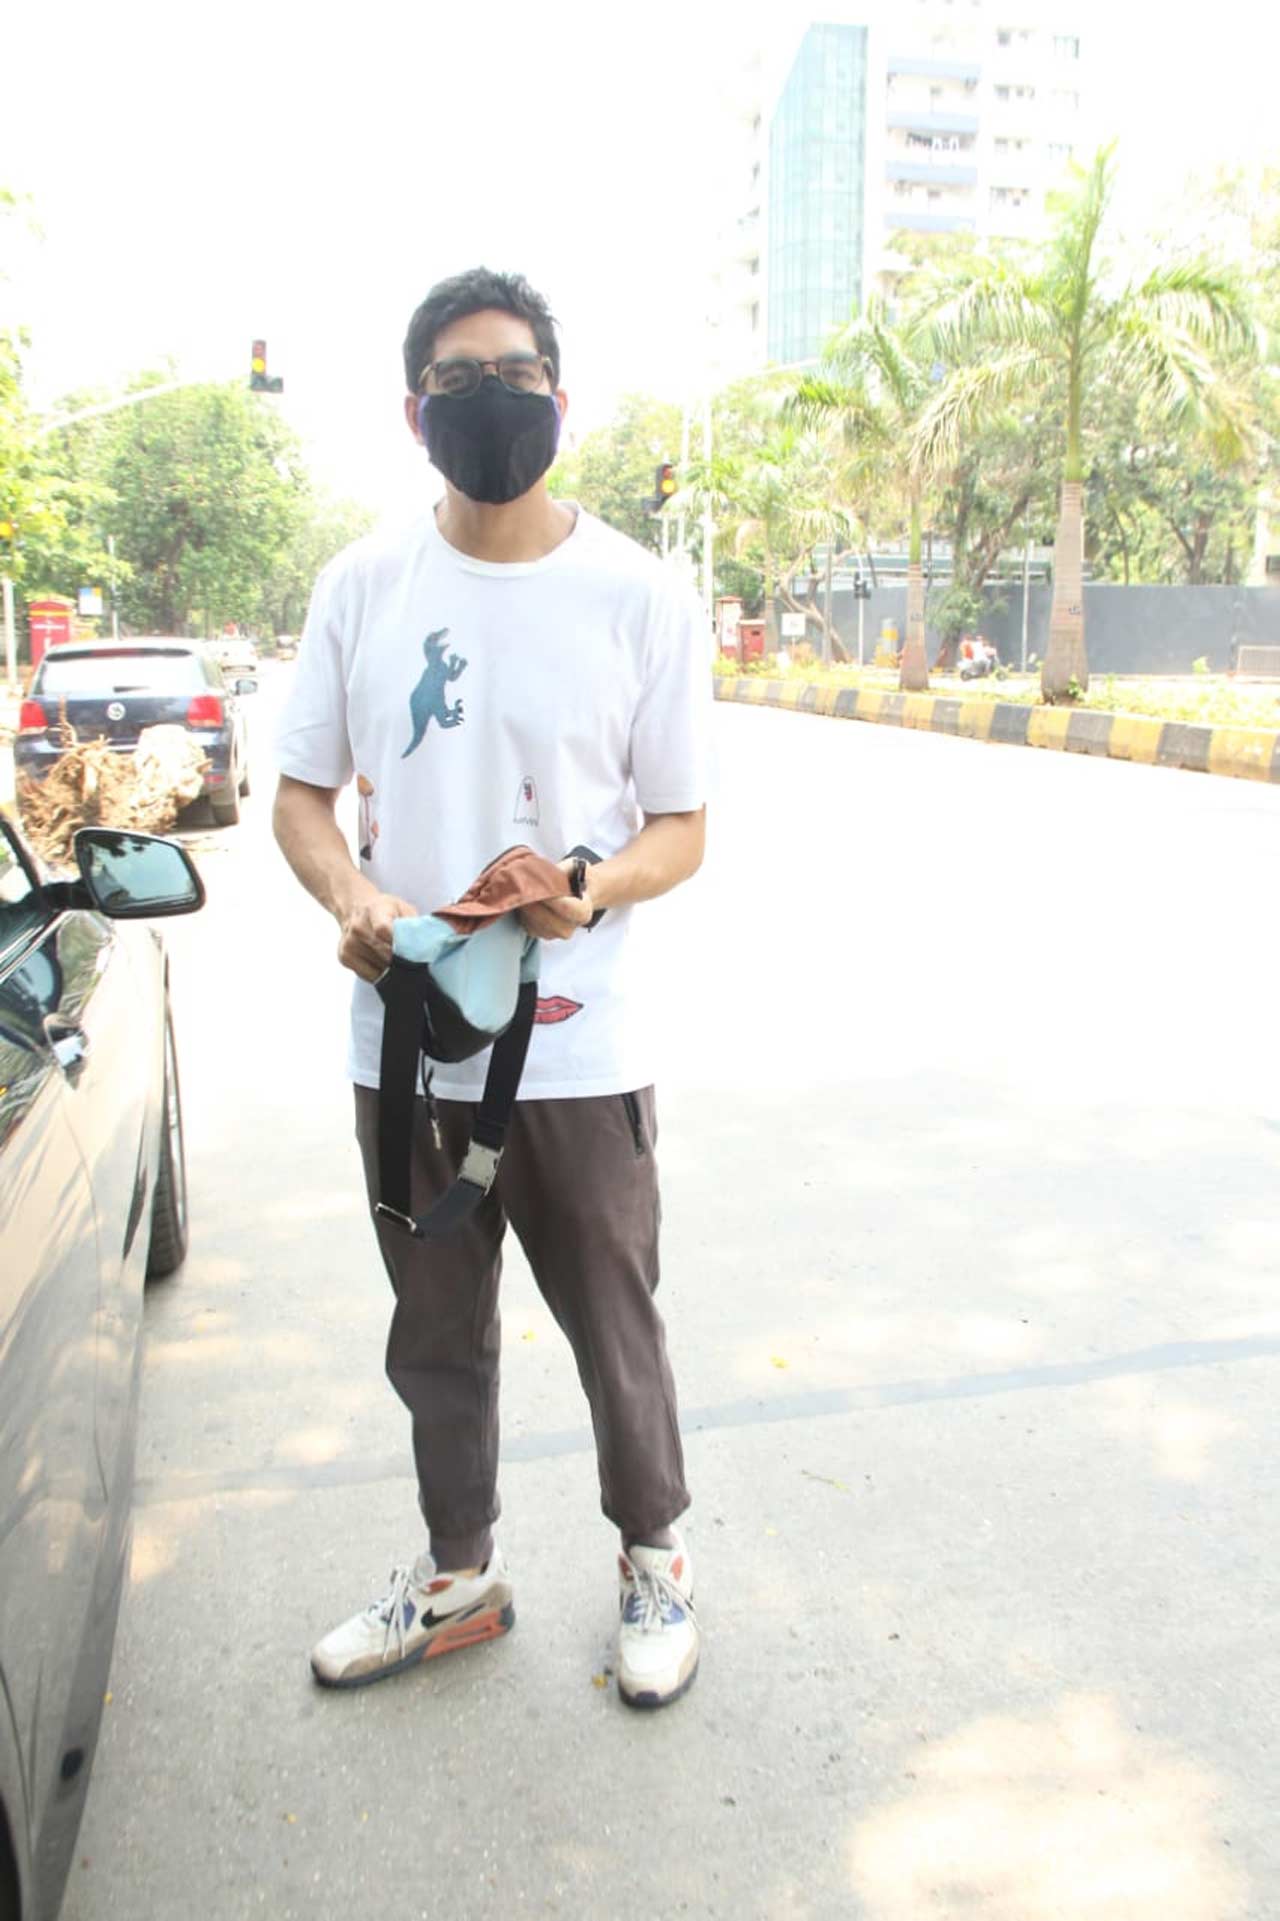 Ayan Mukerji was also spotted in the city. The popular director opted for a white tee, paired with basic joggers during the outing.